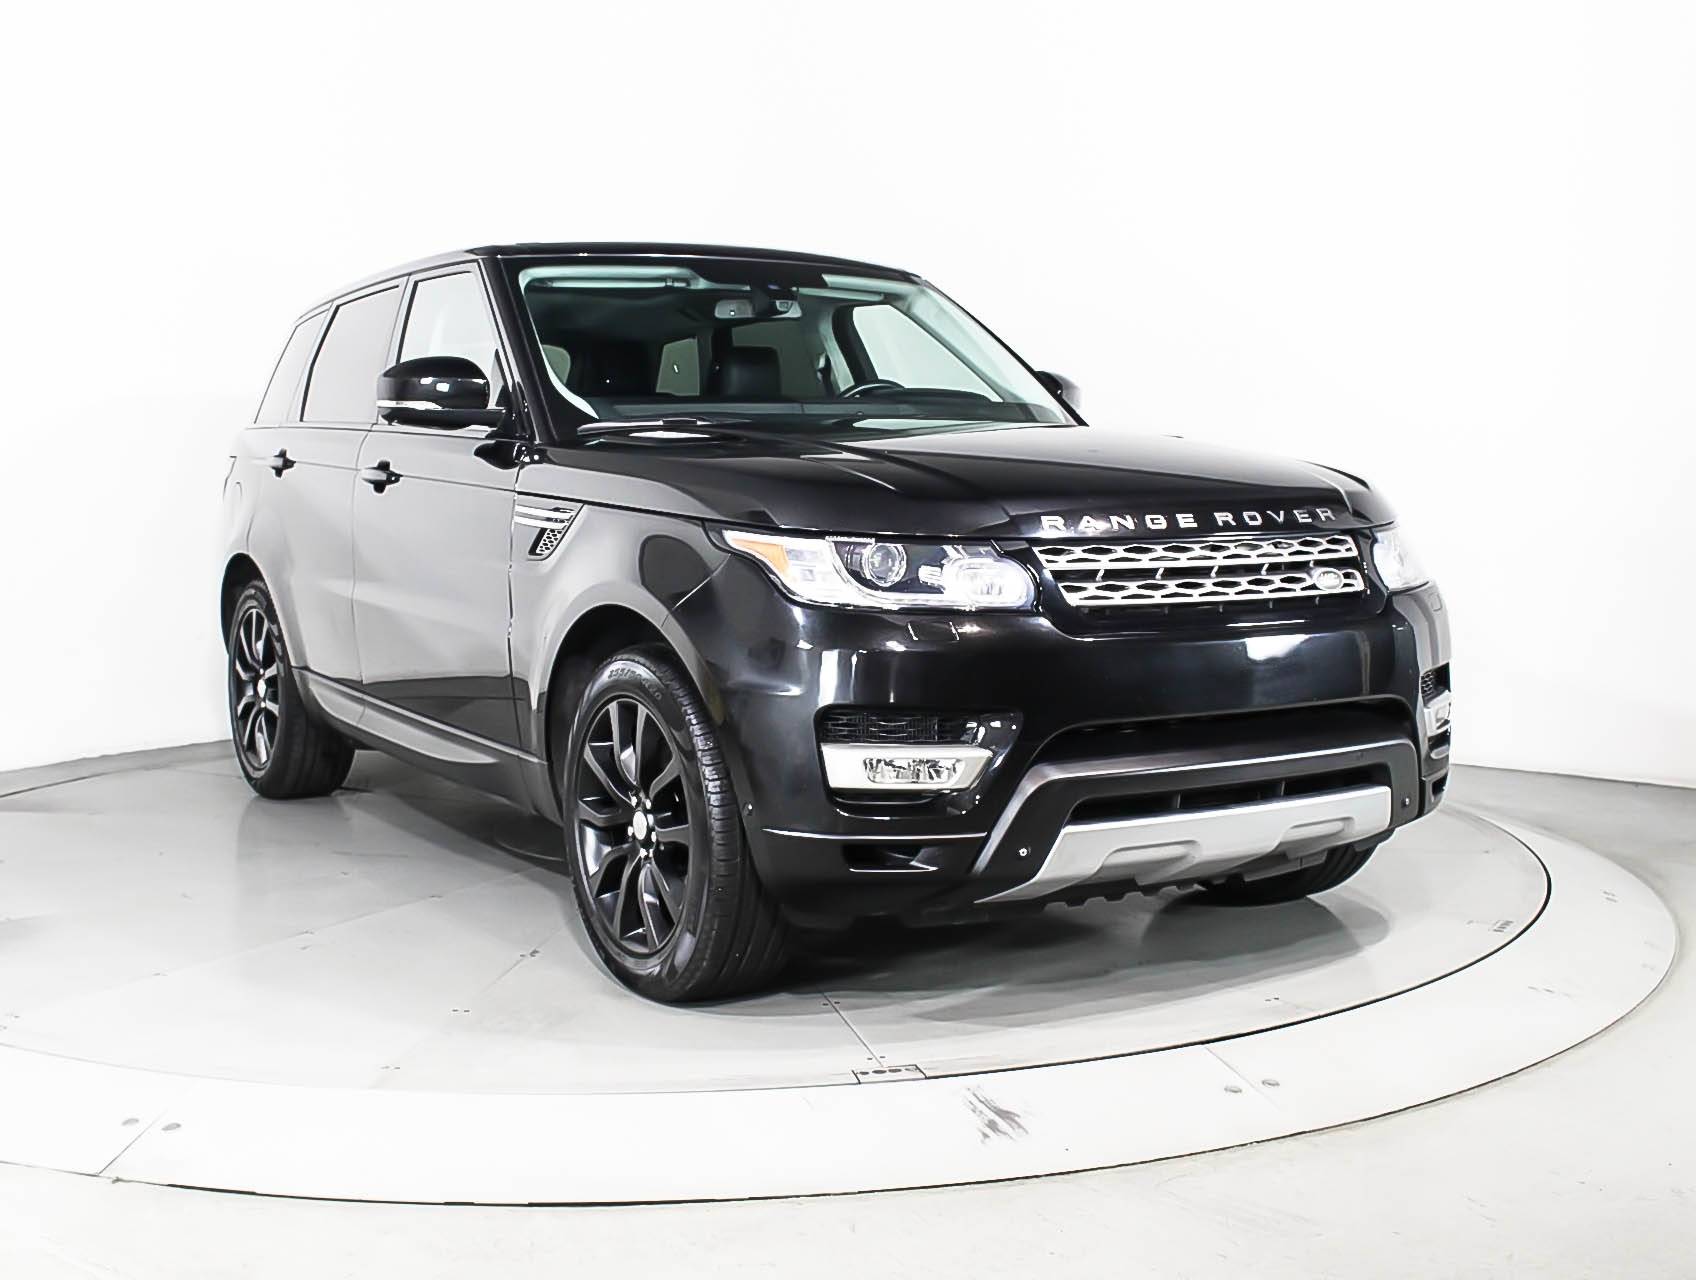 Florida Fine Cars - Used LAND ROVER RANGE ROVER SPORT 2014 WEST PALM SUPERCHARGED